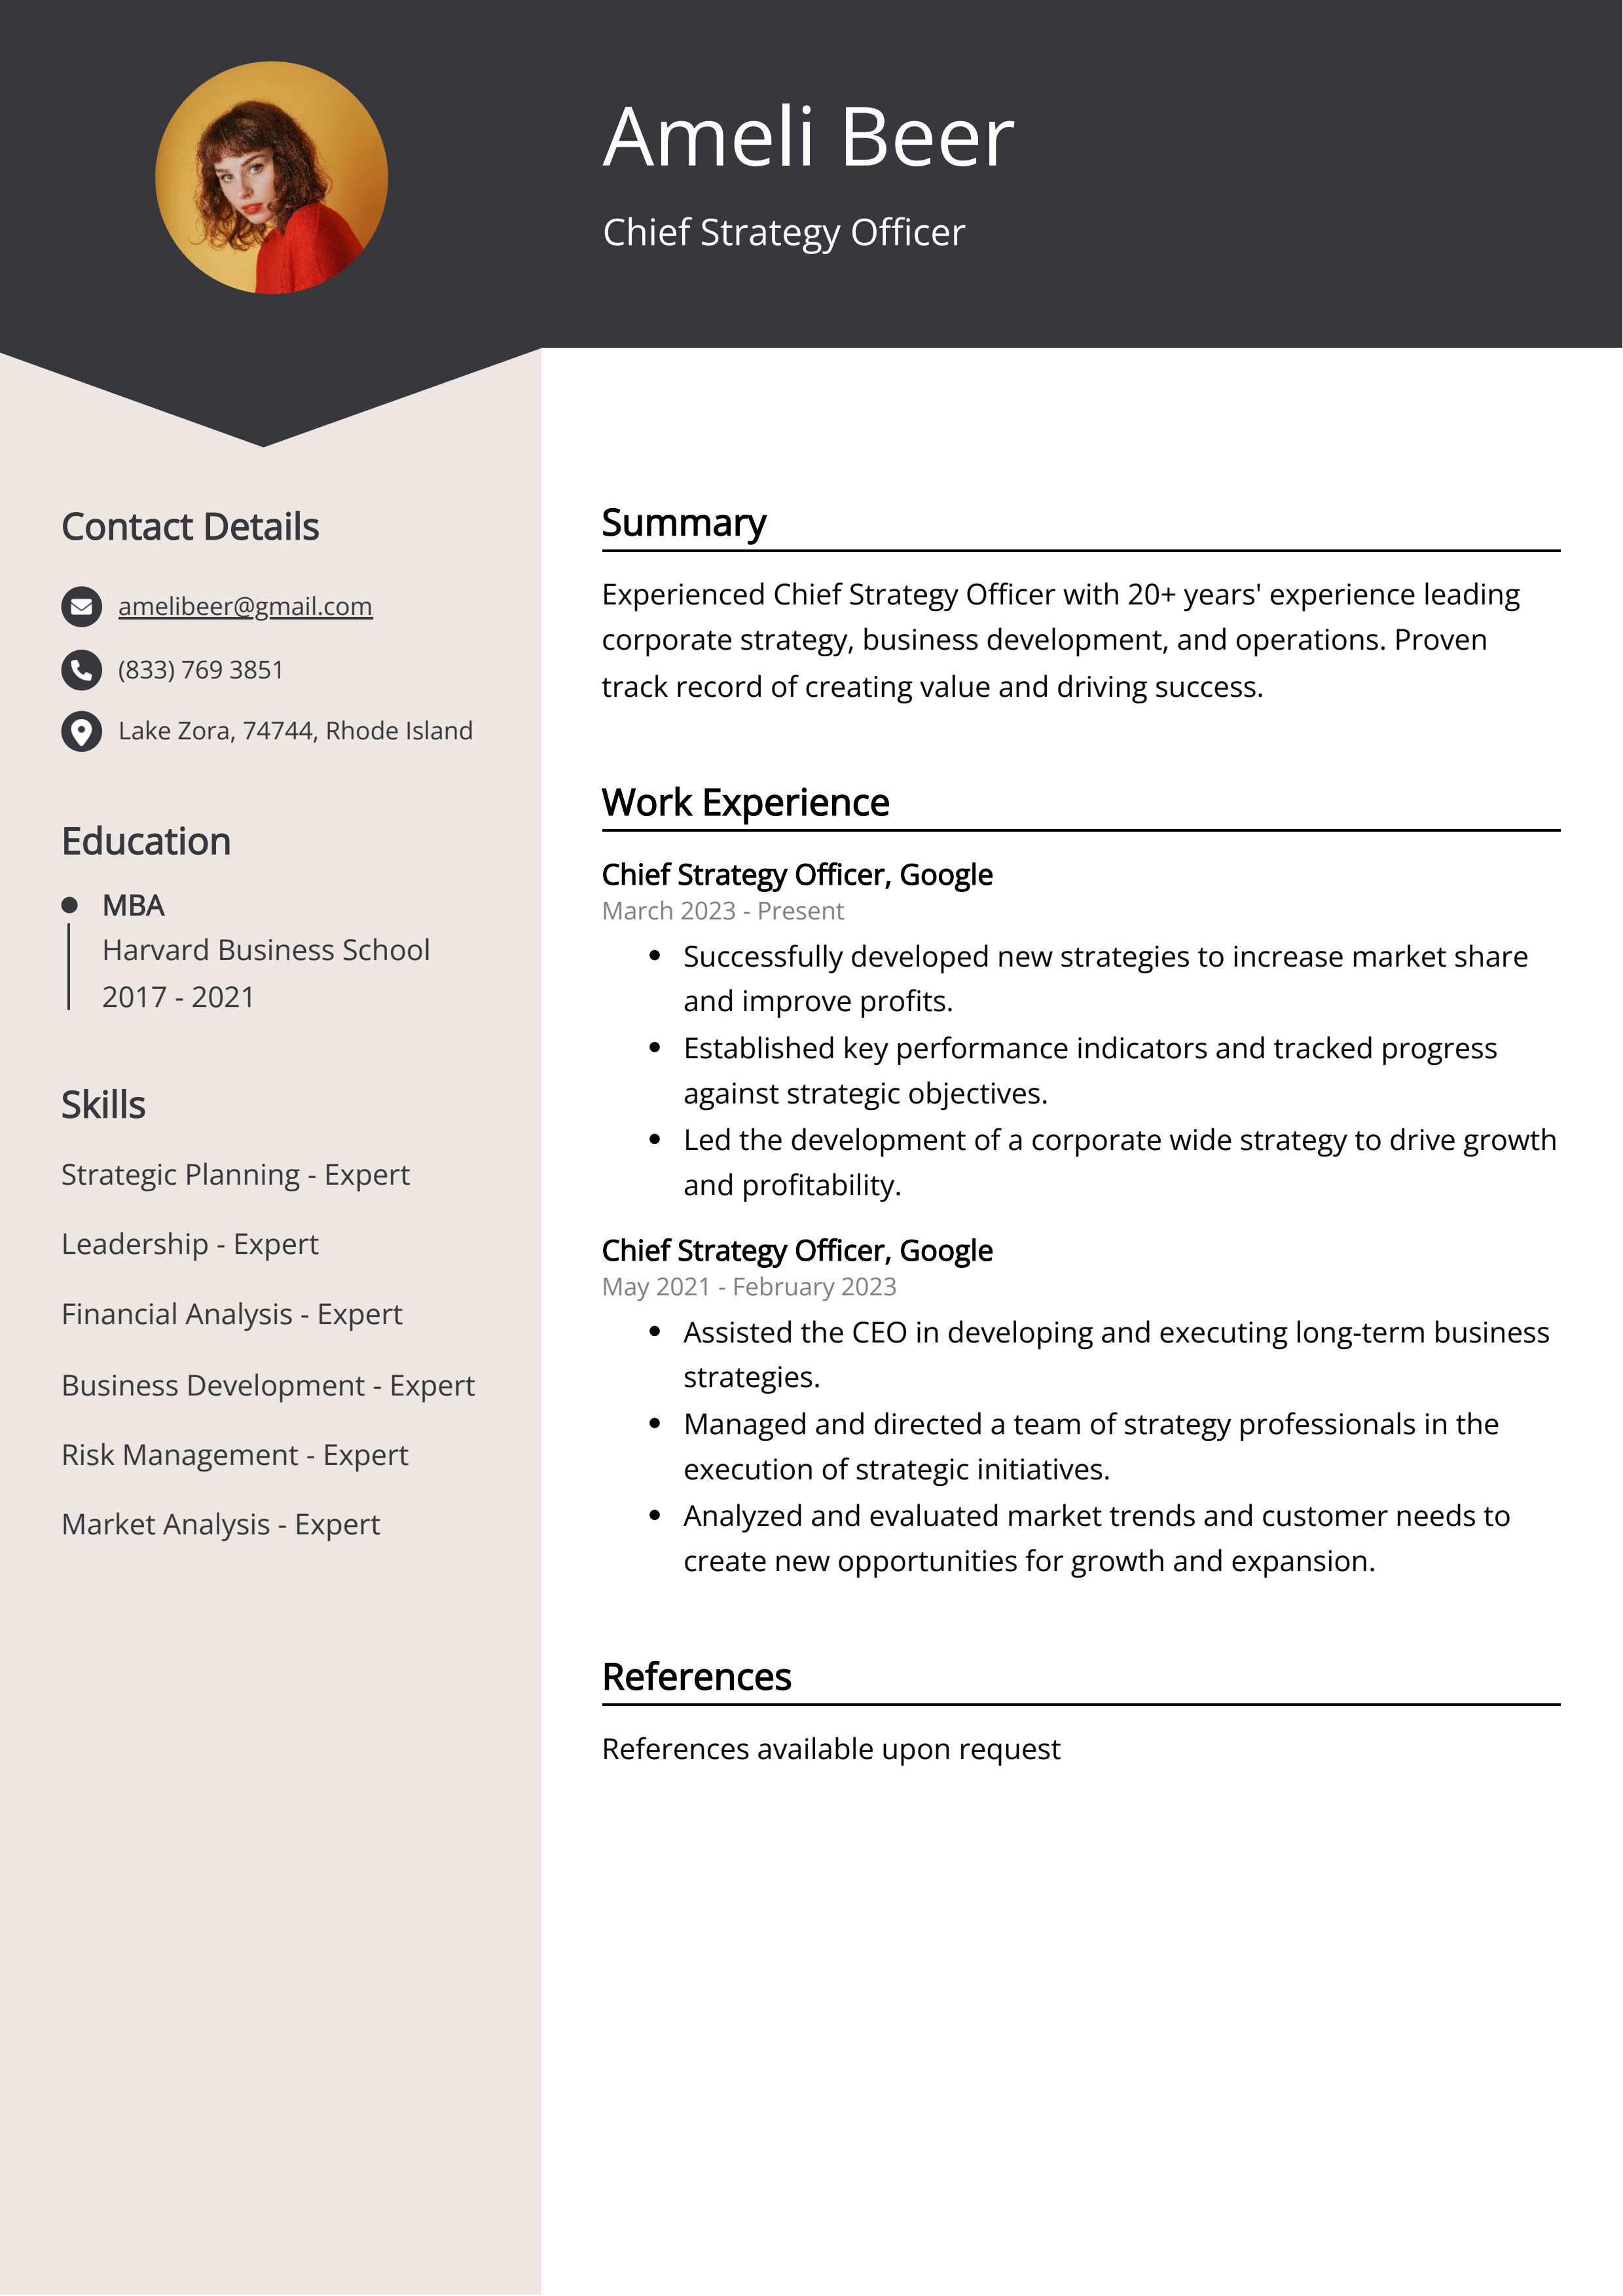 Chief Strategy Officer CV Example